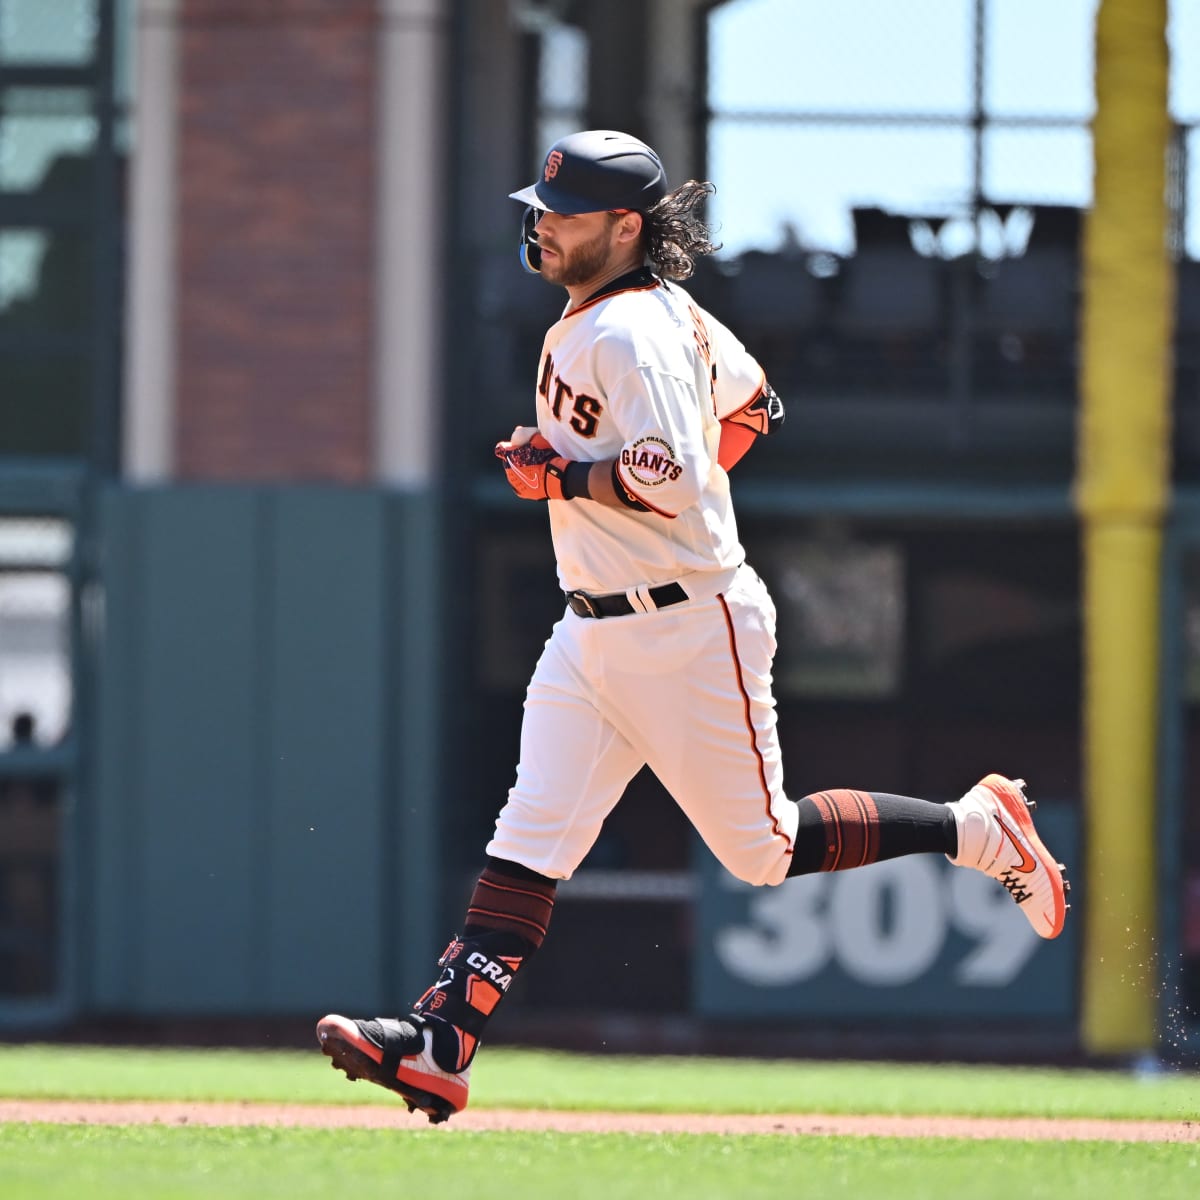 B-Craw still relishes 'crazy' dream playing for hometown Giants